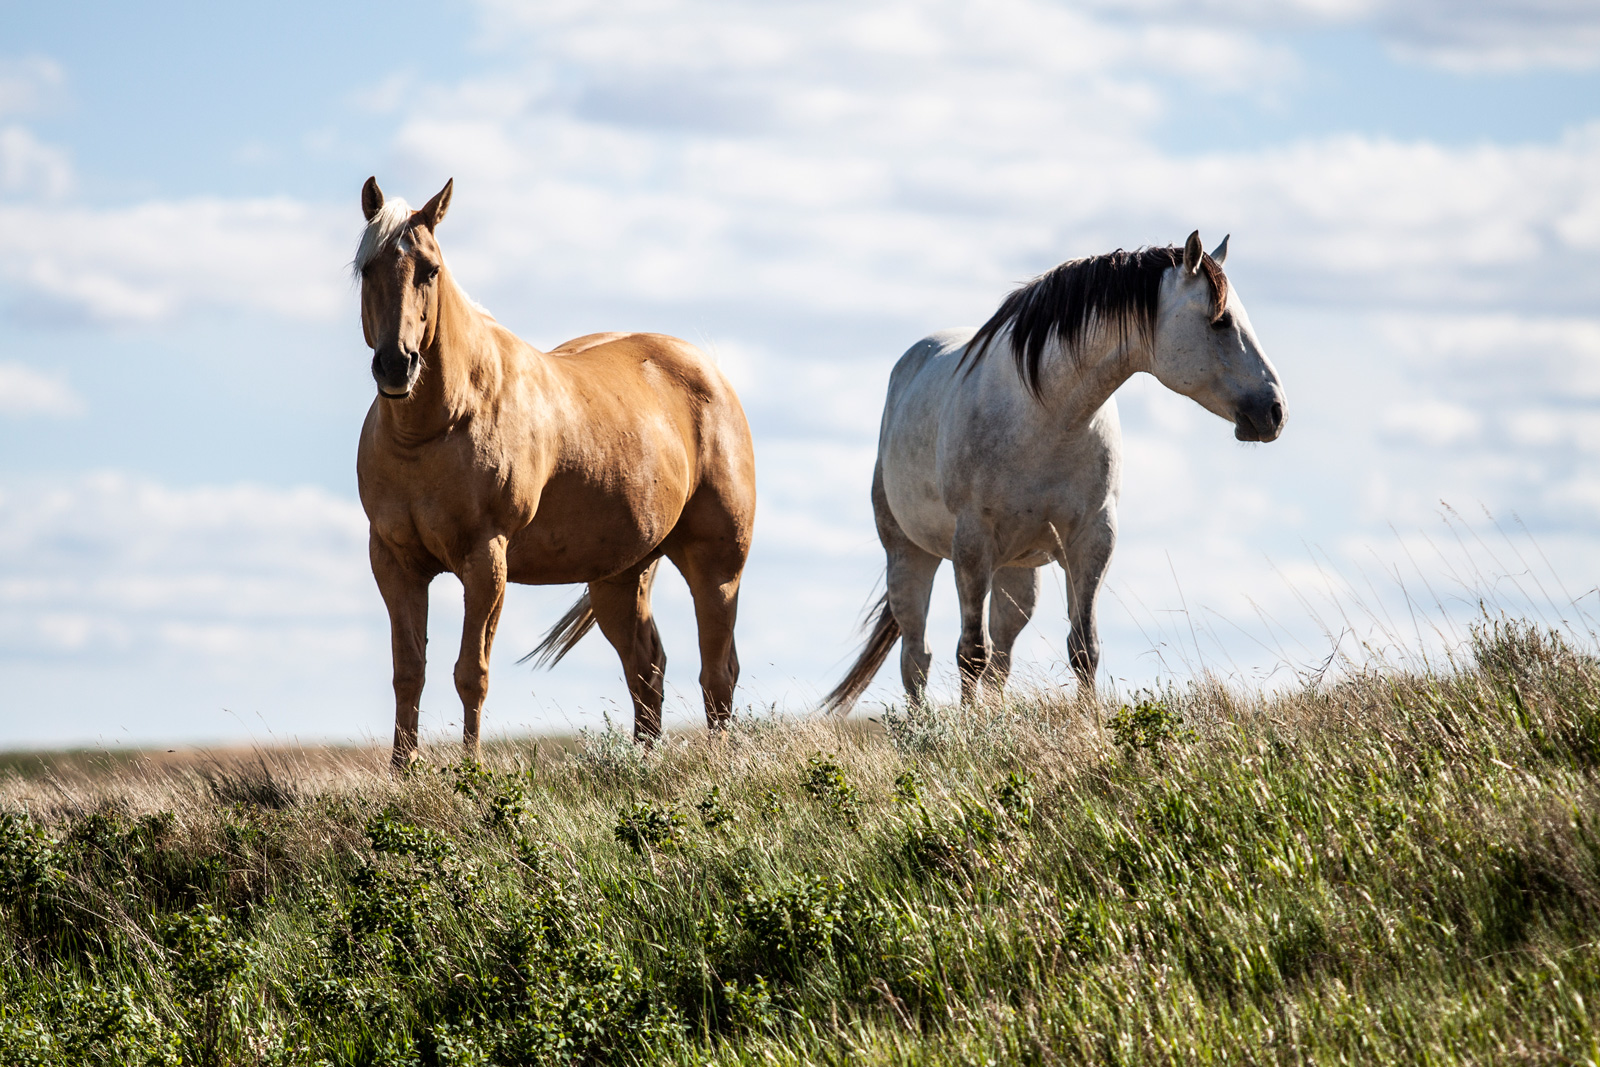 Pair of horses in the grass Lifestyle Photography from K2 Productions